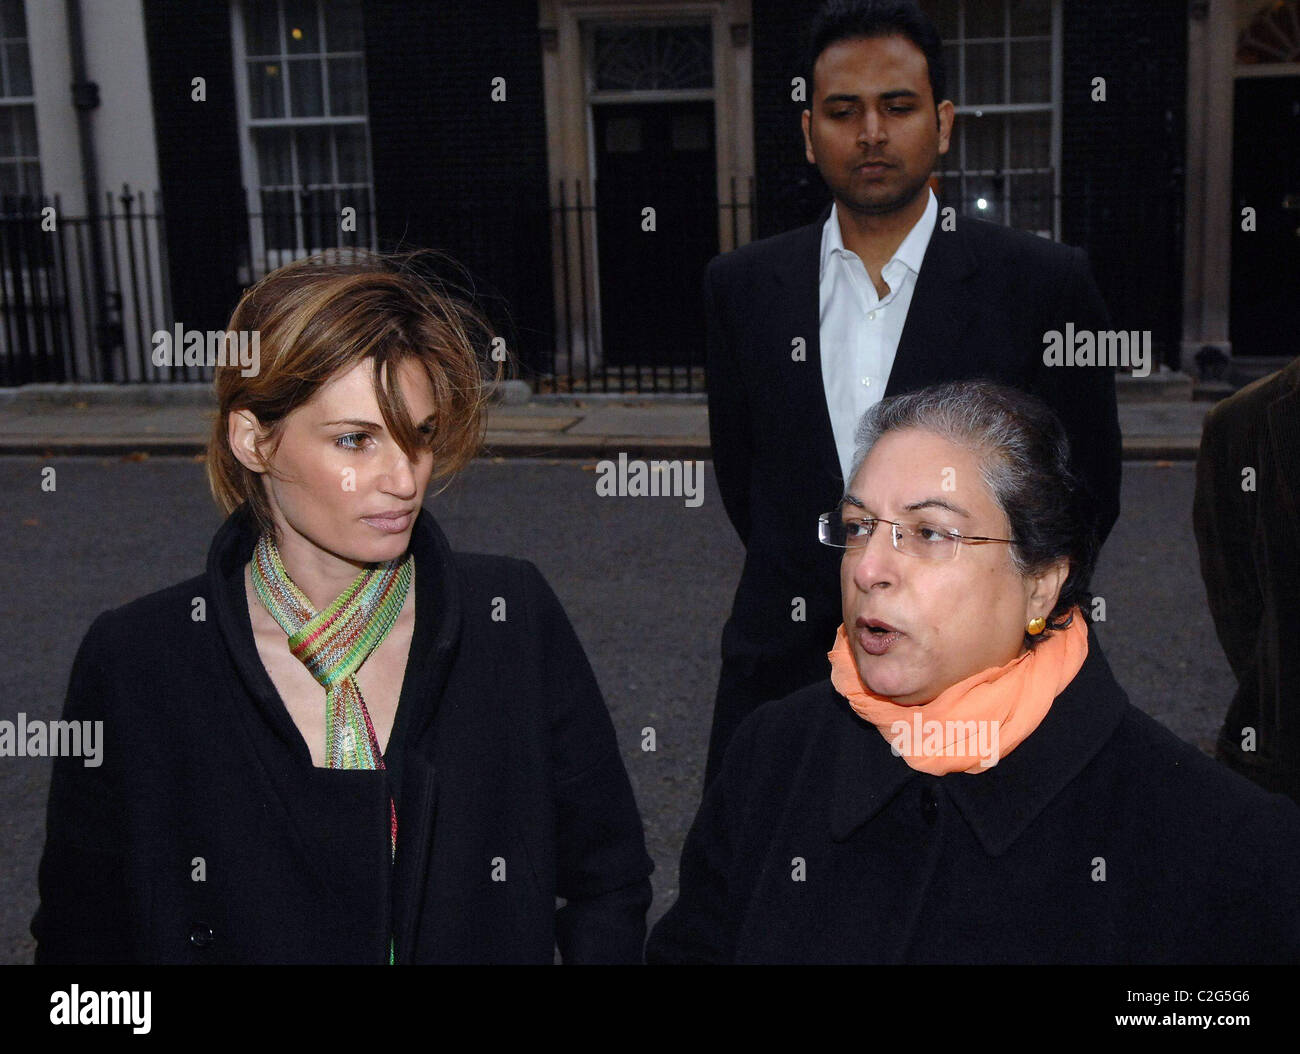 Jemima Khan and human rights lawyer Hina Jilani handing in a petition at 10 Downing Street demanding democracy in Pakistan Stock Photo